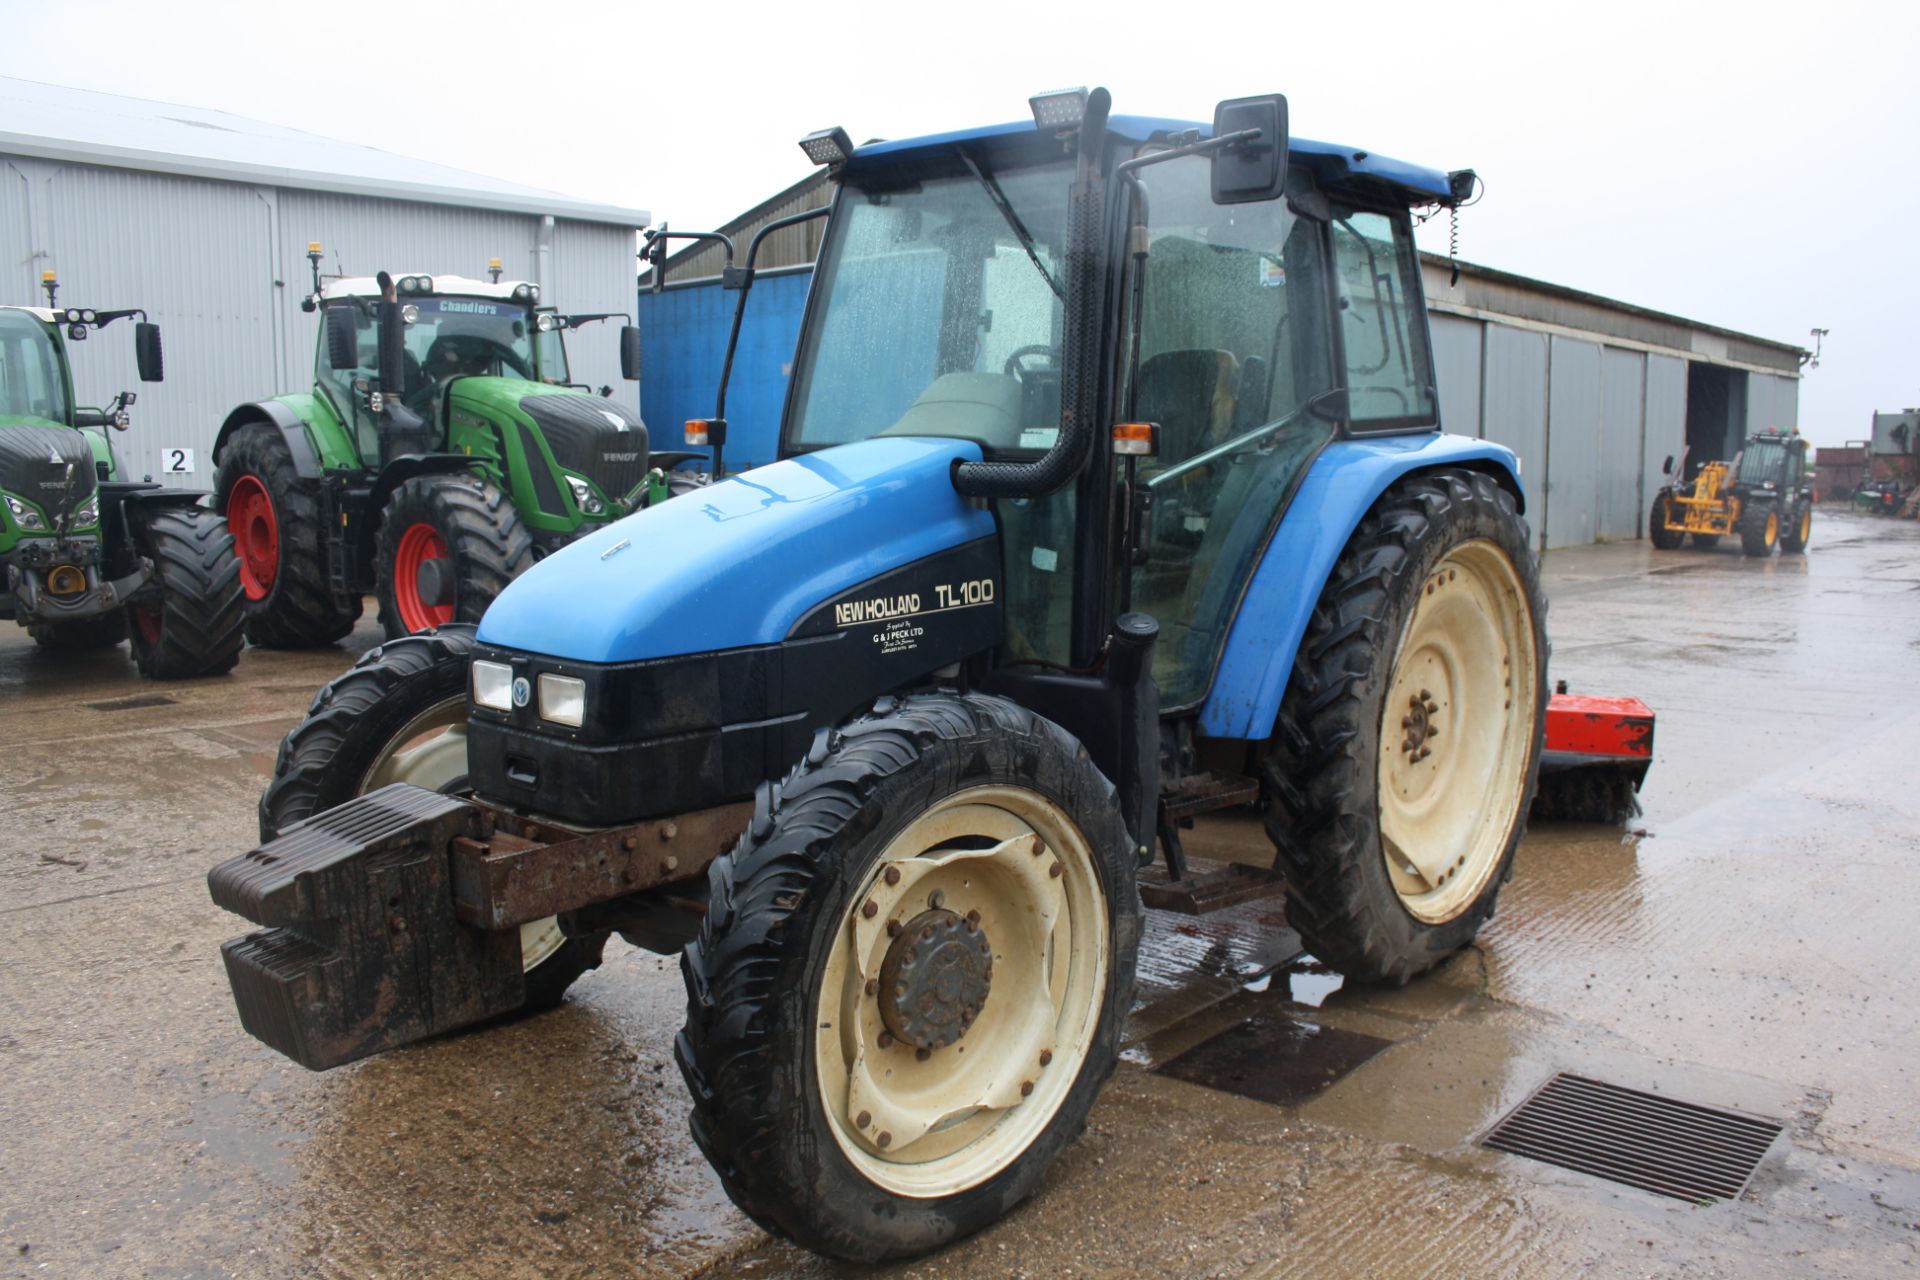 Ford New Holland TL100, 4wd Tractor, Reg Y387 0FW 6,940 hours, 3 speed PTO, Tyres - Rear: